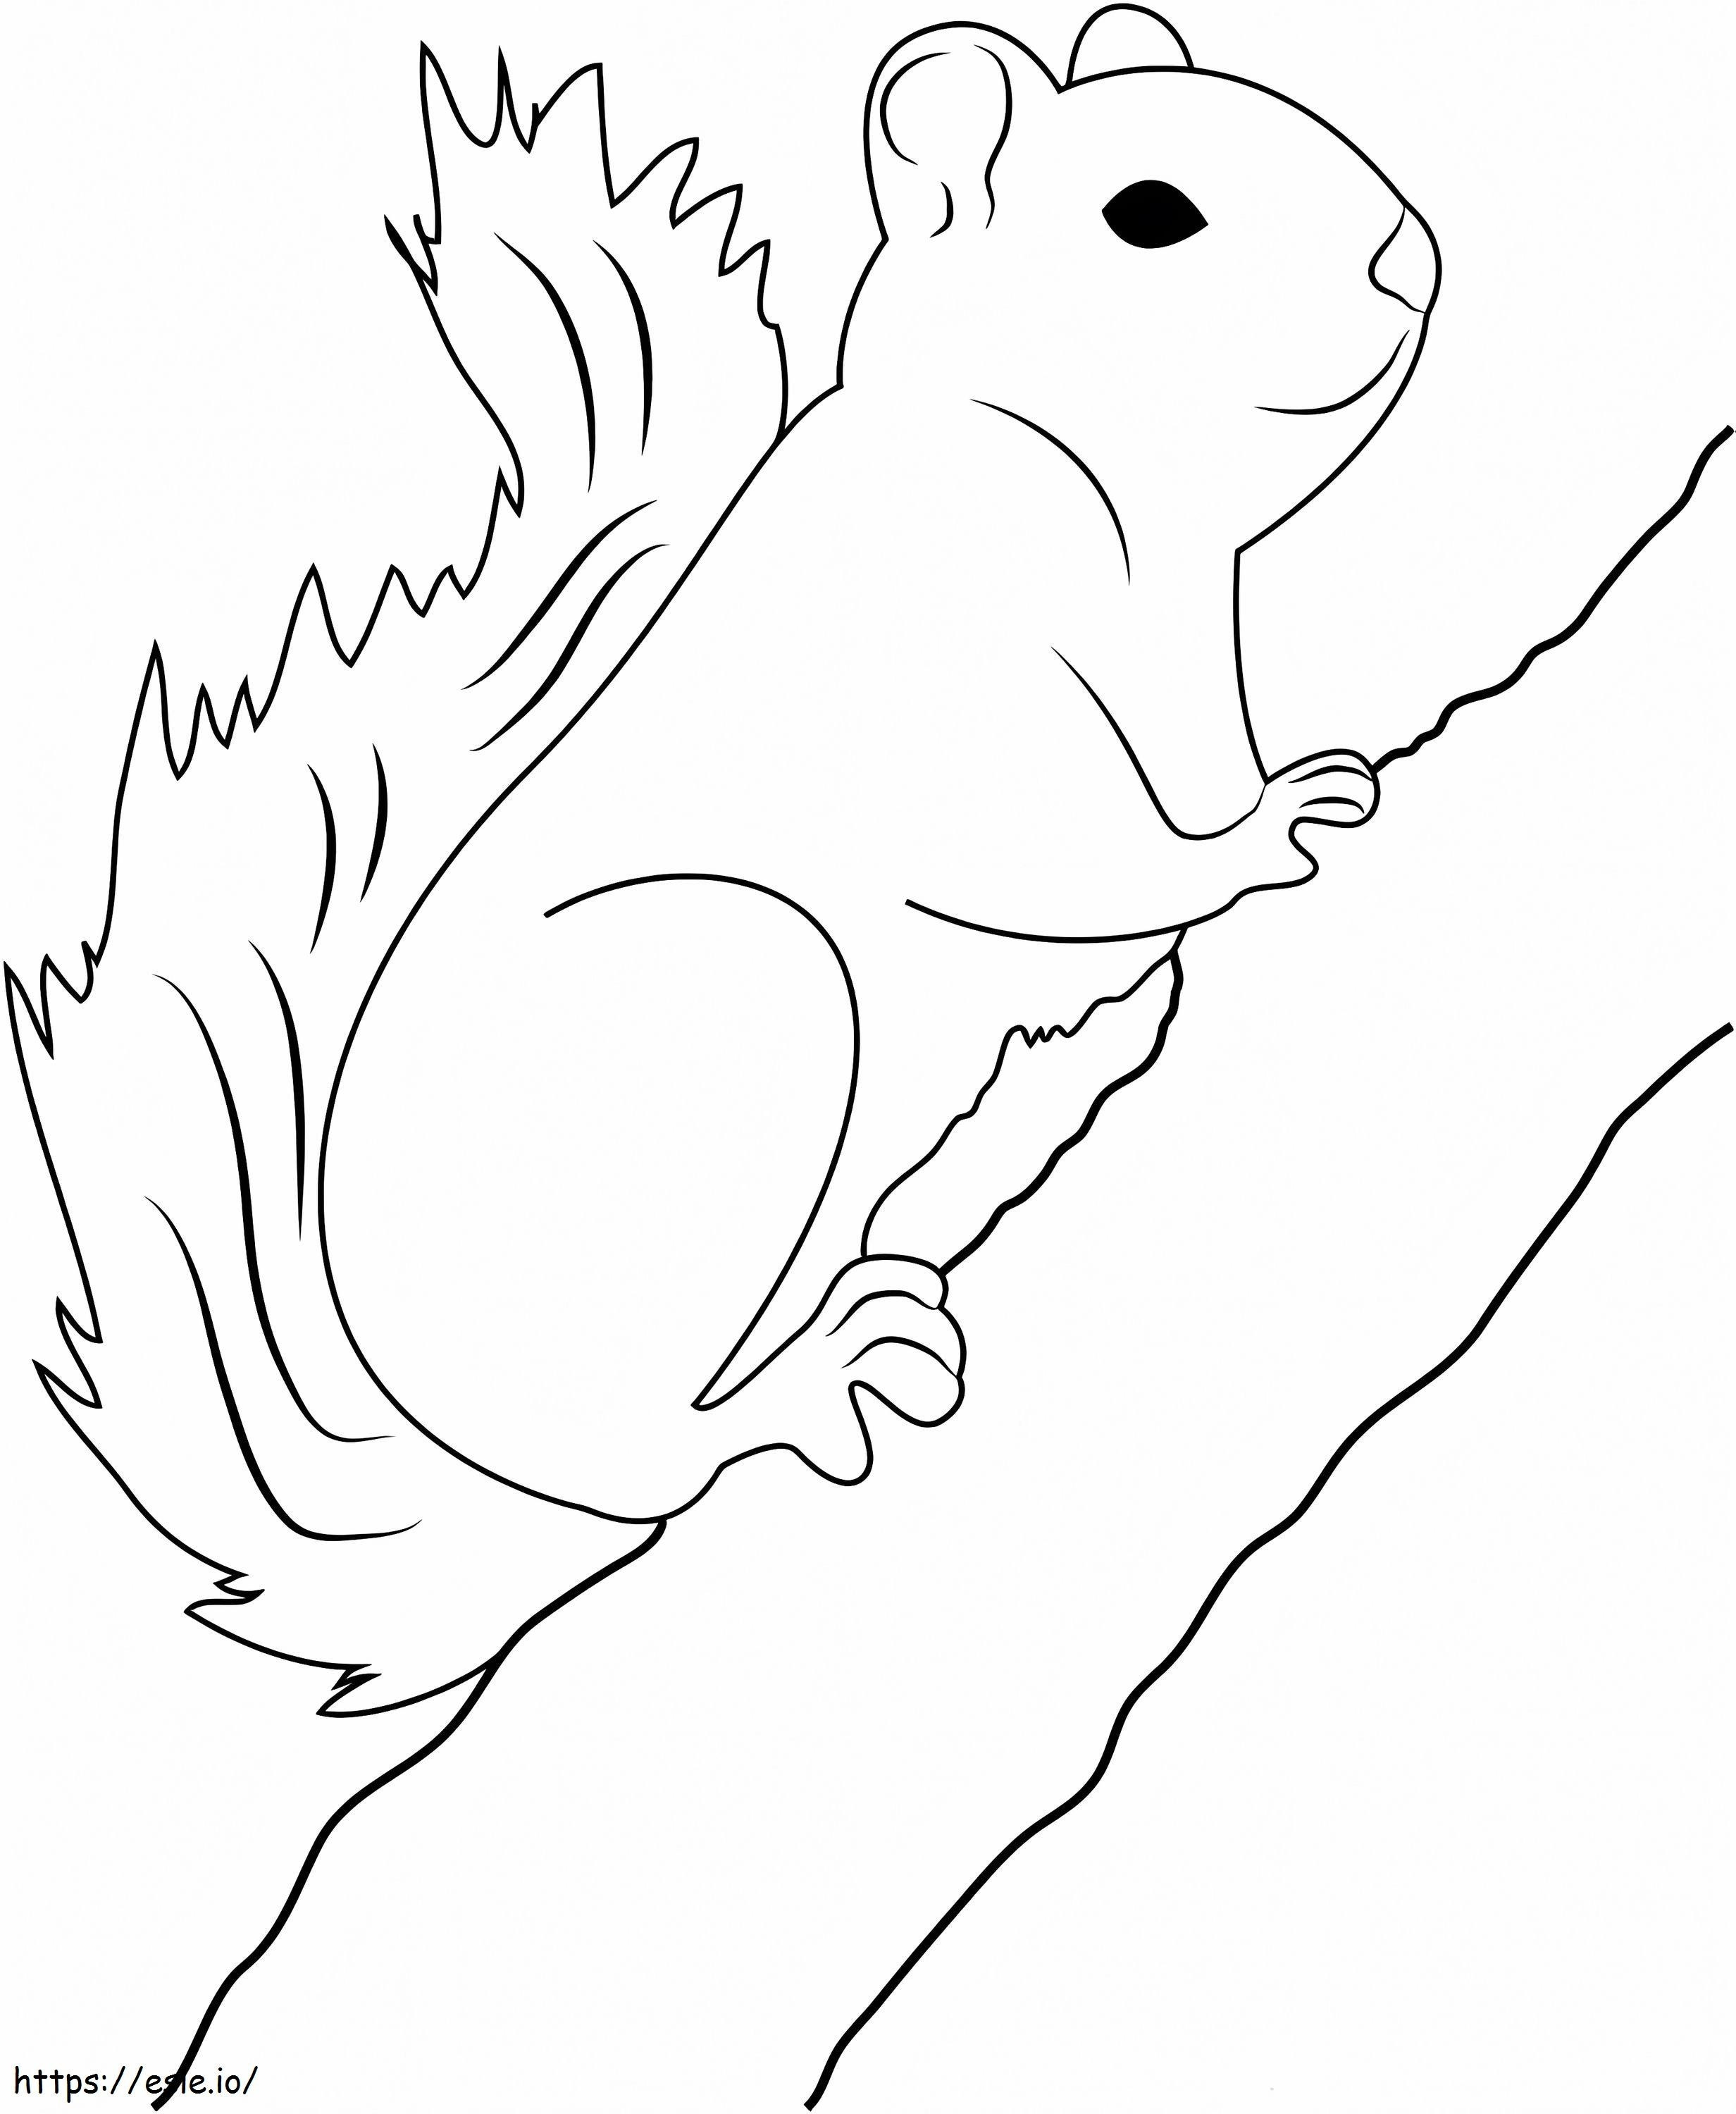 Squirrel Climbing Tree Branch coloring page